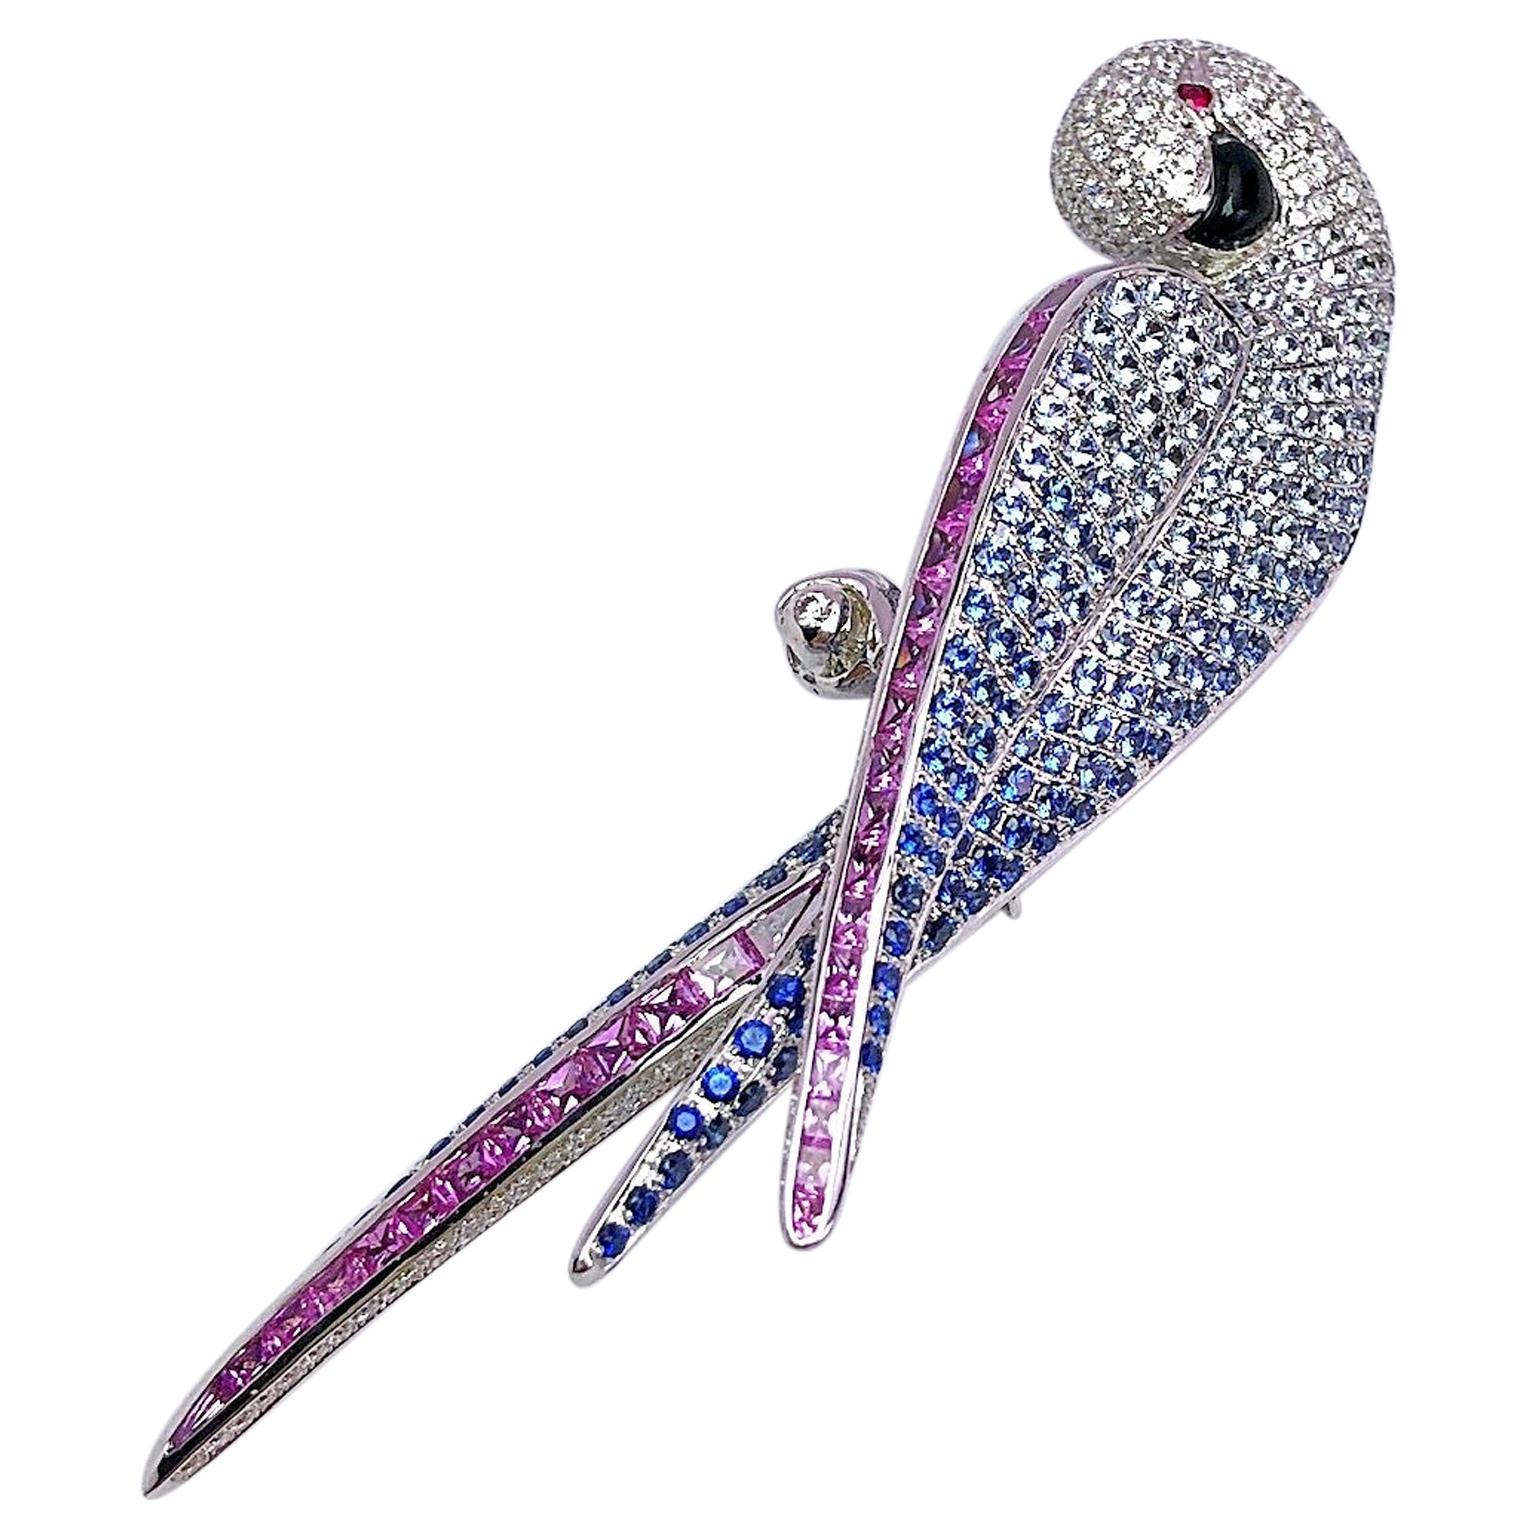 Stenzhorn 18 Karat White Gold Diamond and Pastel Sapphire Parrot Brooch For Sale